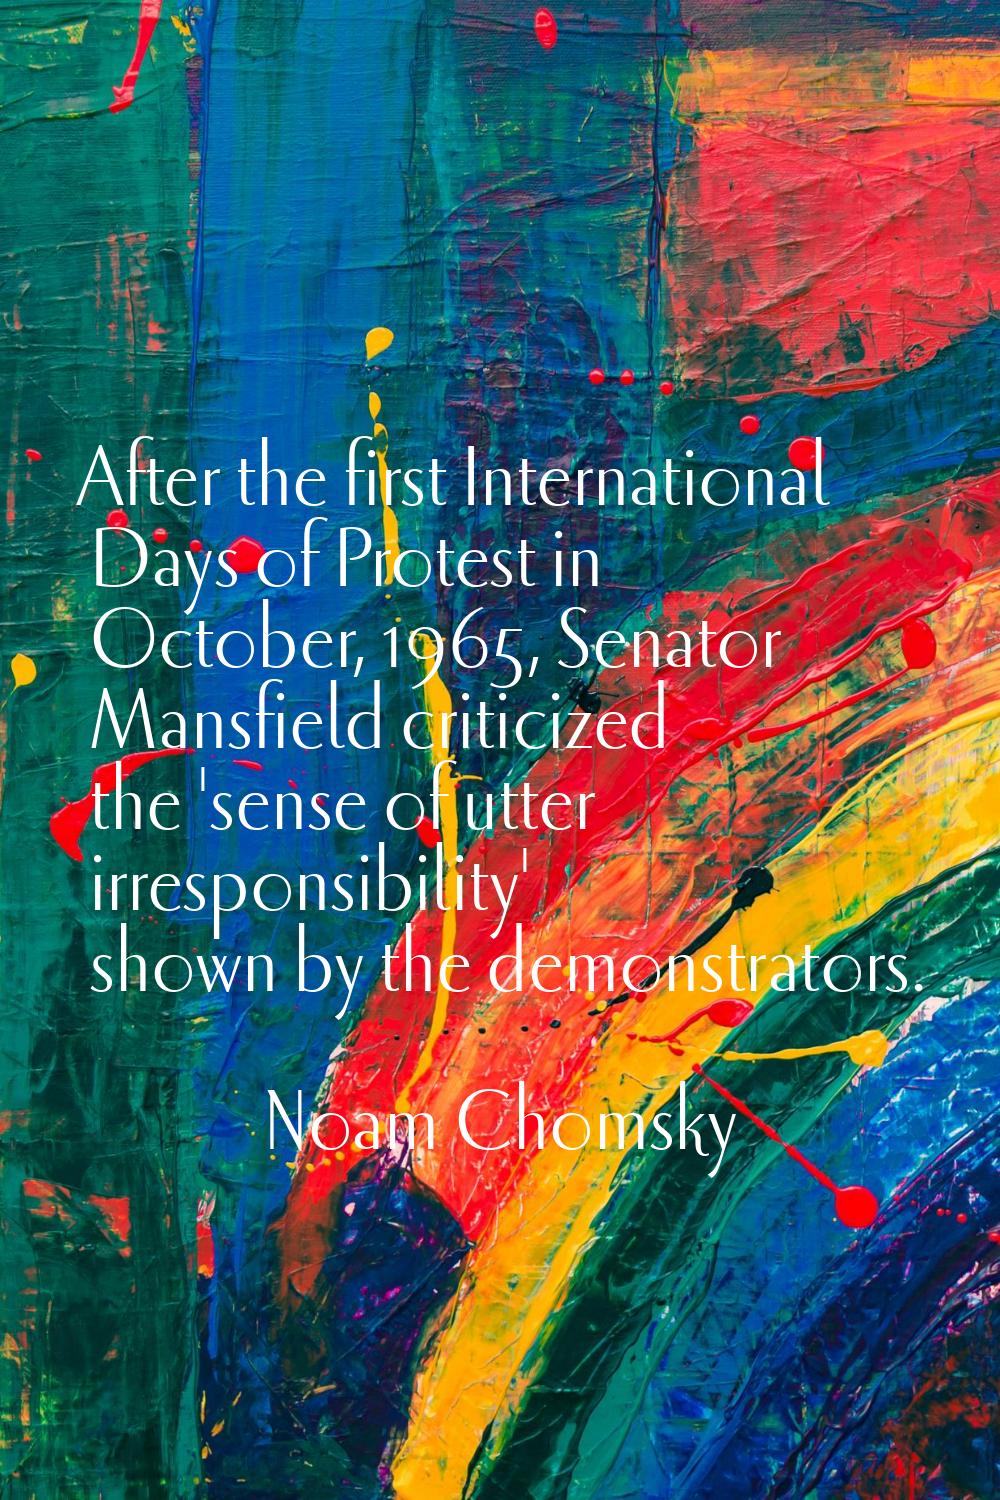 After the first International Days of Protest in October, 1965, Senator Mansfield criticized the 's